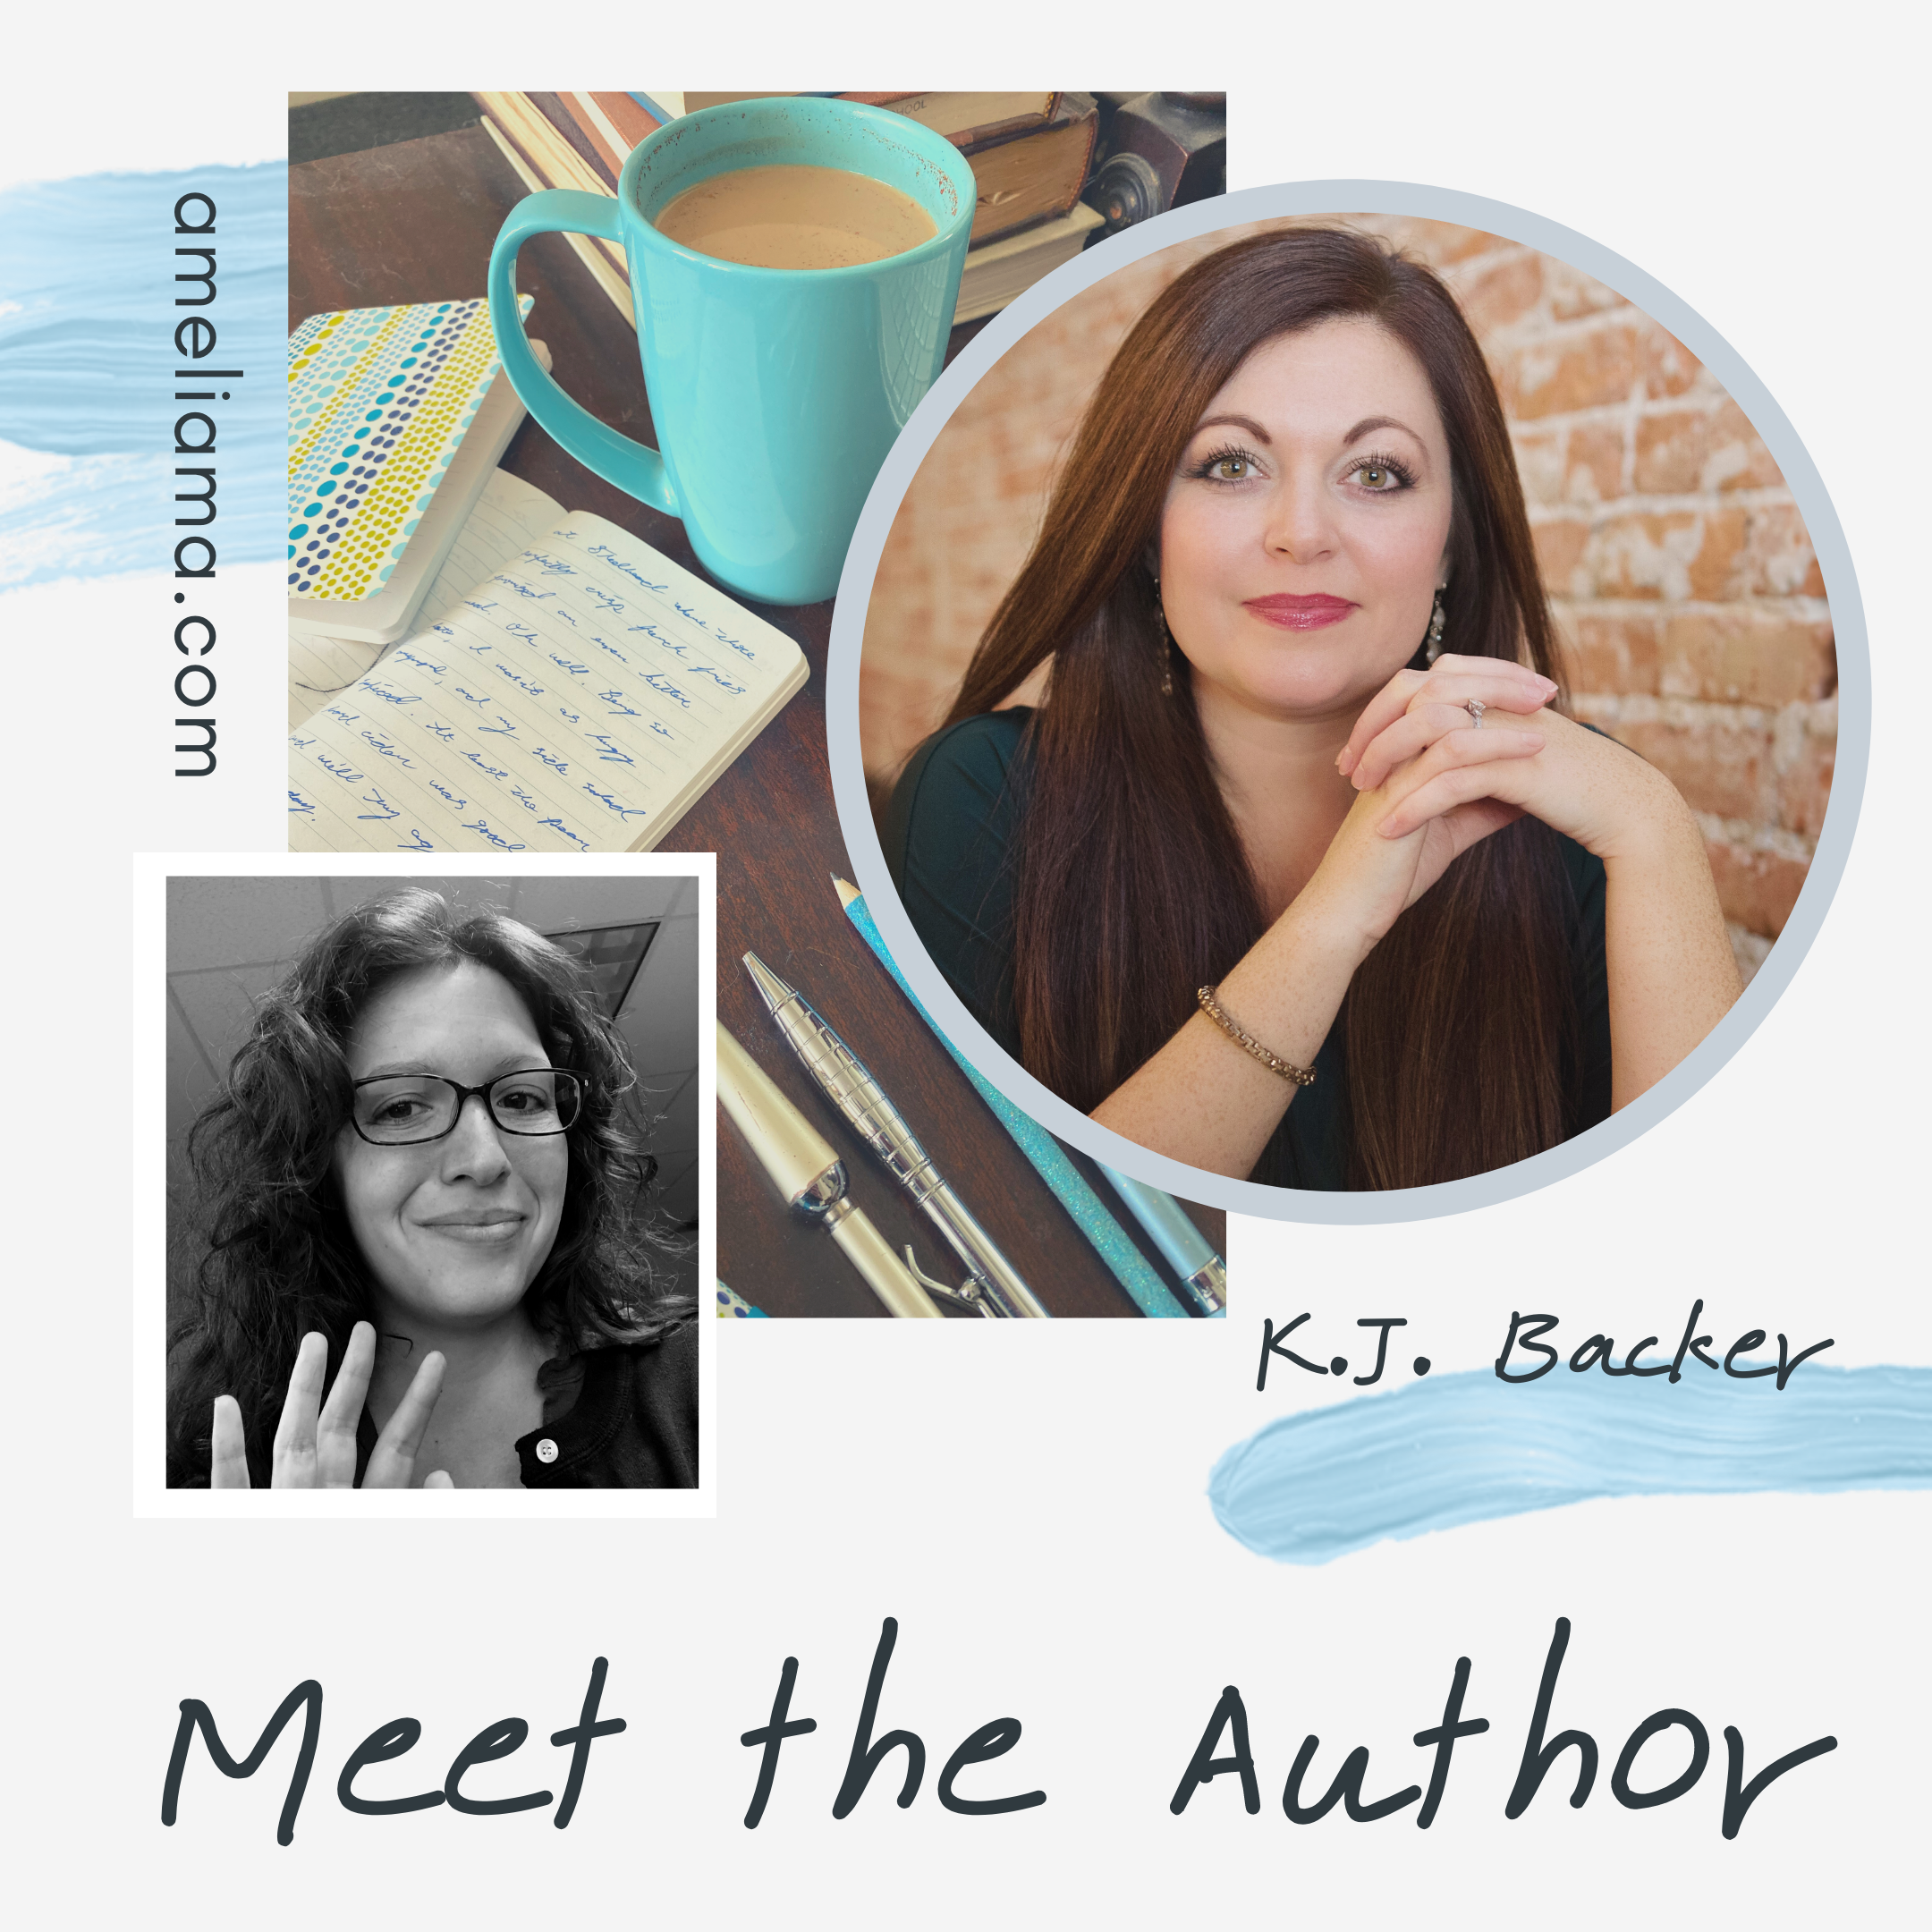 Meet K.J. Backer in an author interview with Amelia Albanese.